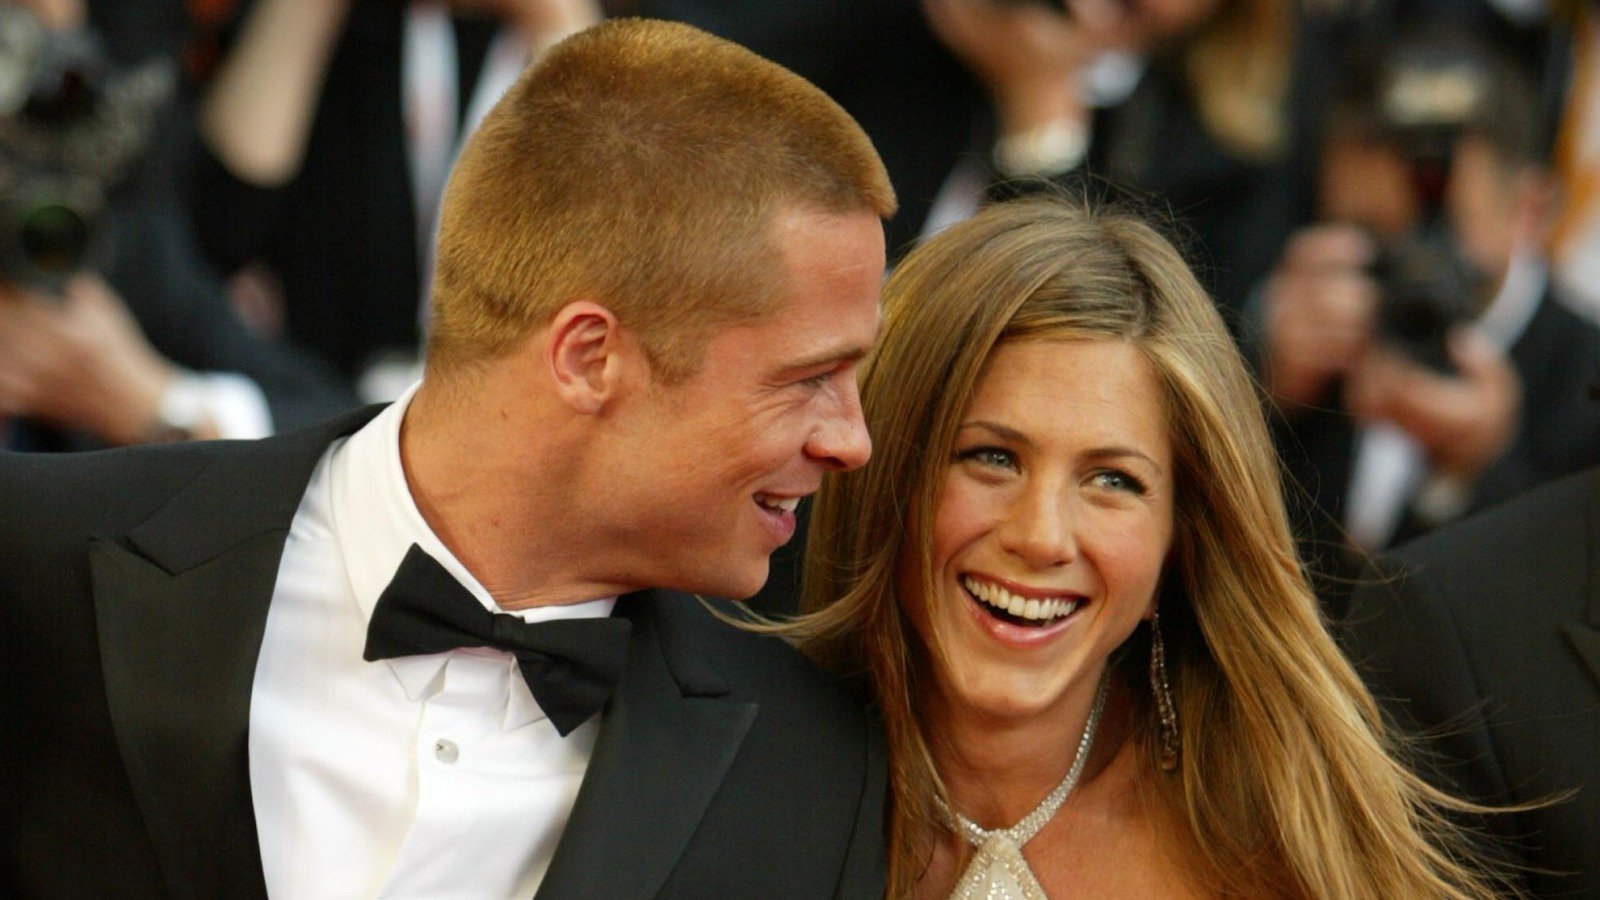 A Timeline Of The Ups And Downs Of Brad Pitt And Jennifer Aniston's Relationship